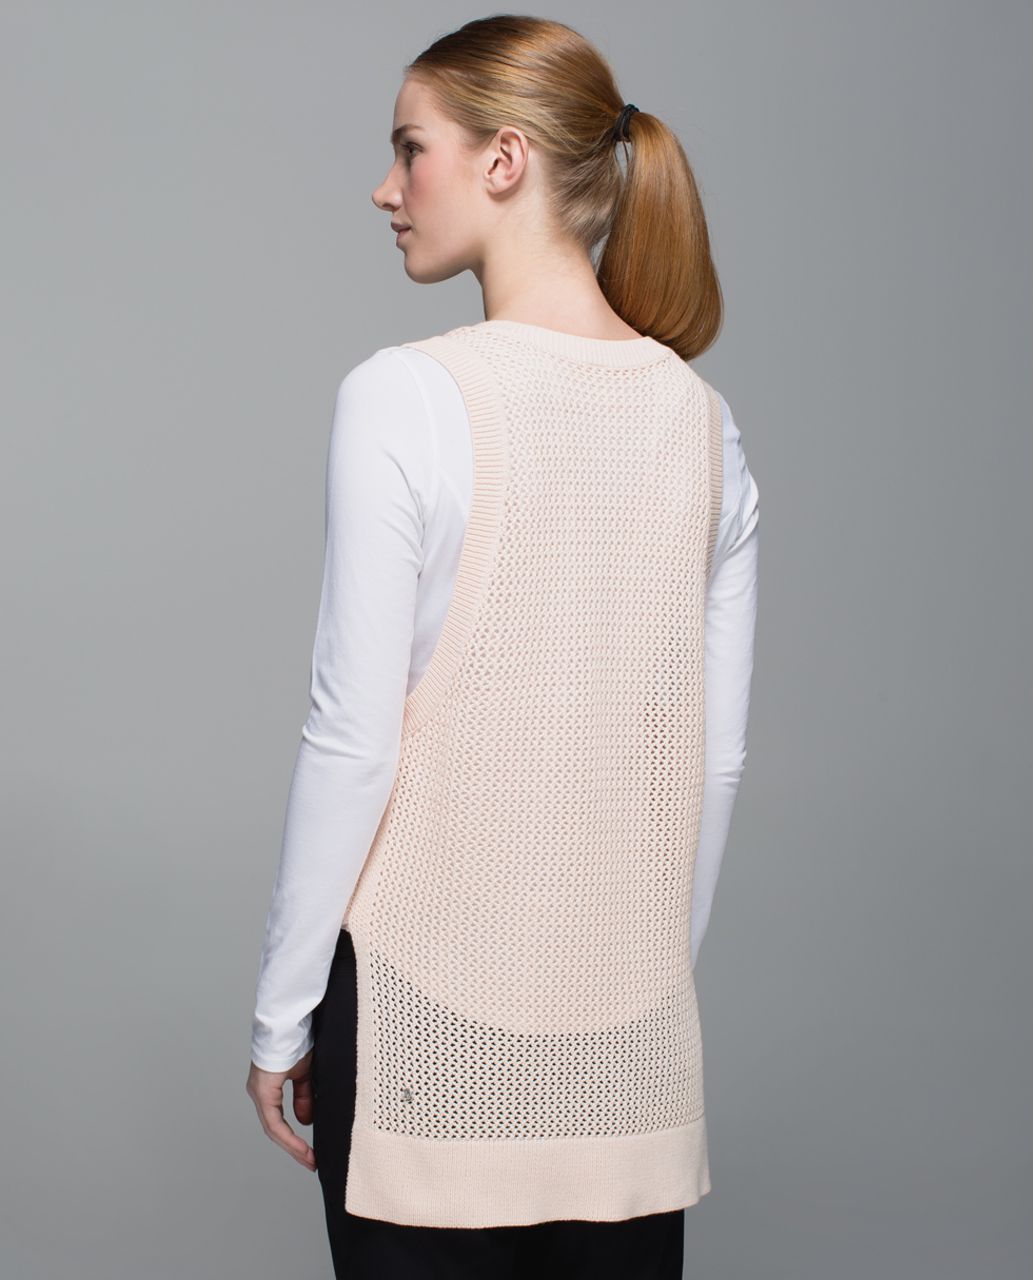 Lululemon Simply The Vest - Butter Pink / Heathered Angel Wing